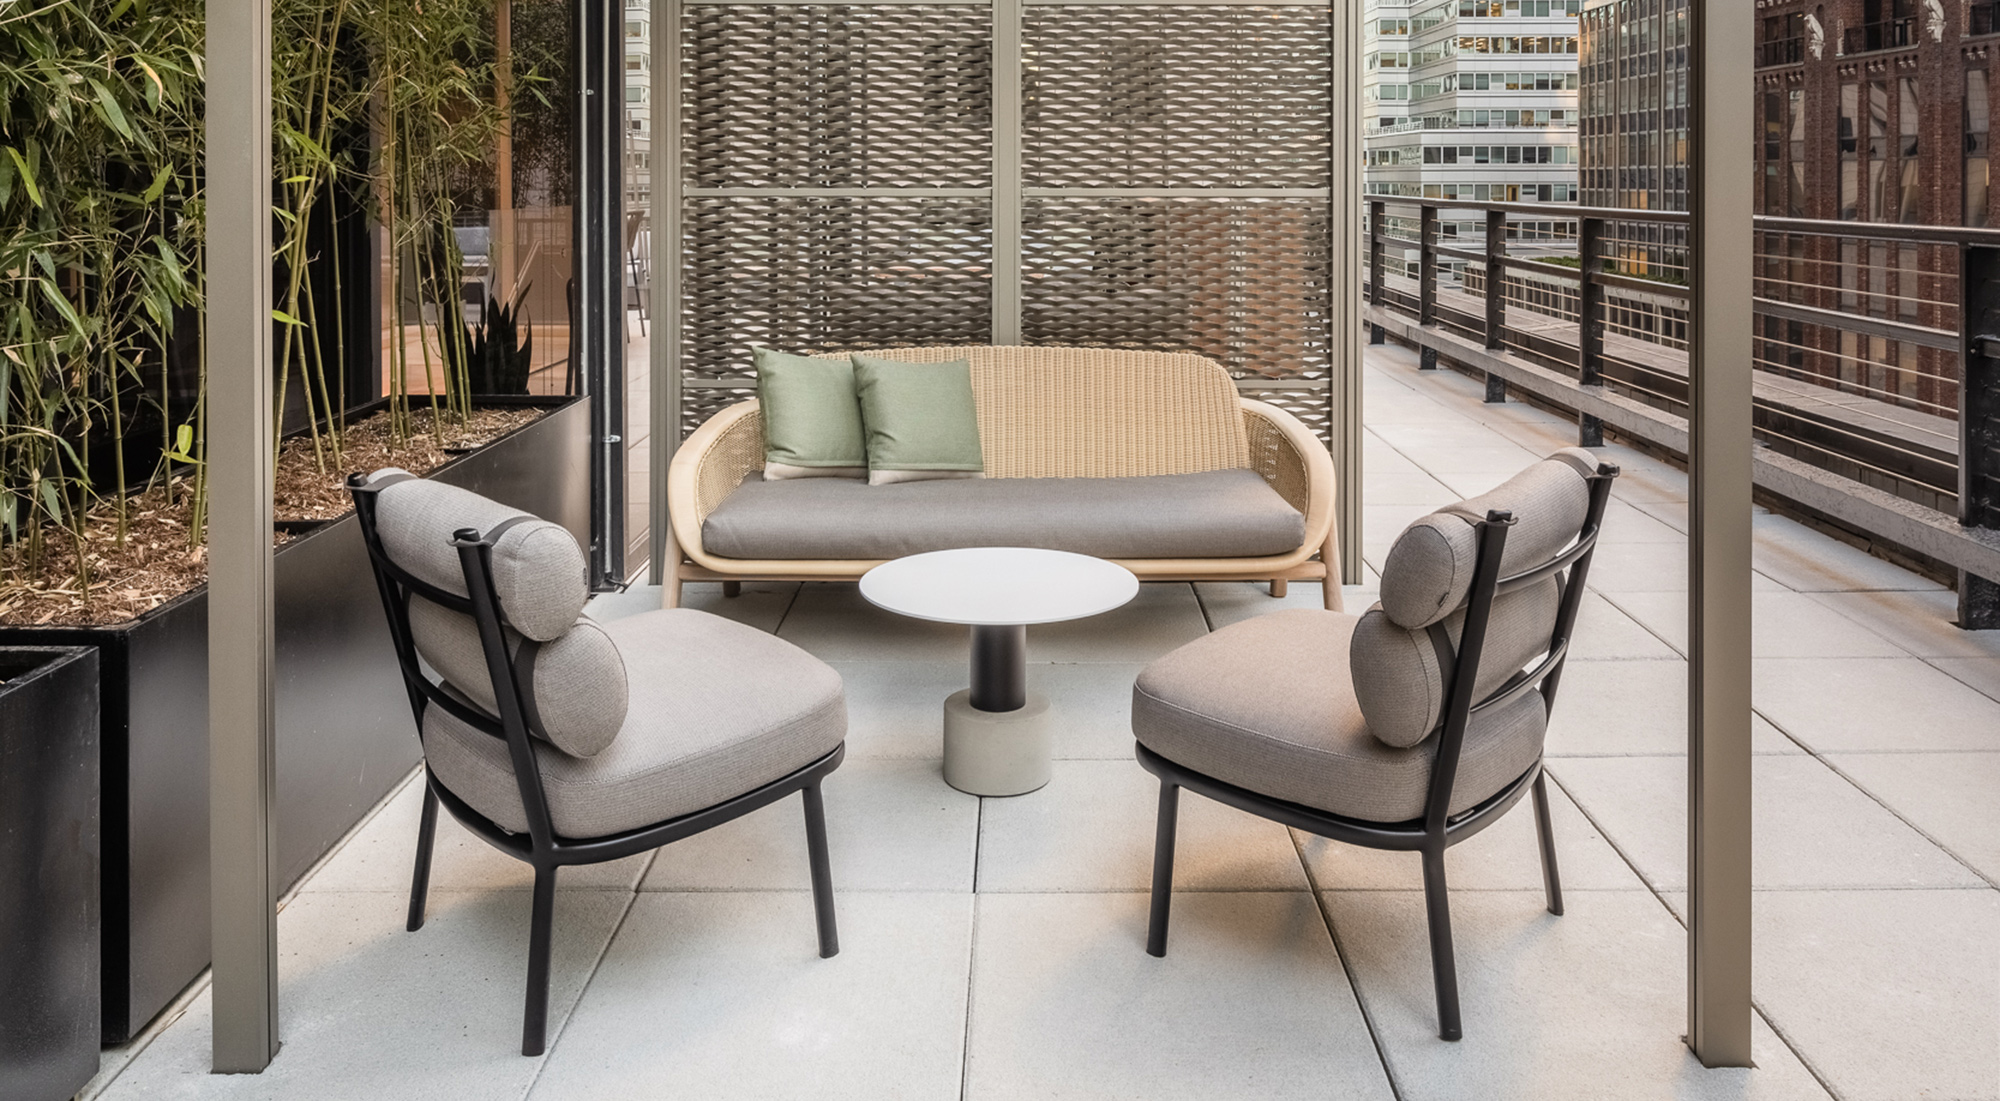 Intimate terrace seating with beige cushions and metal features